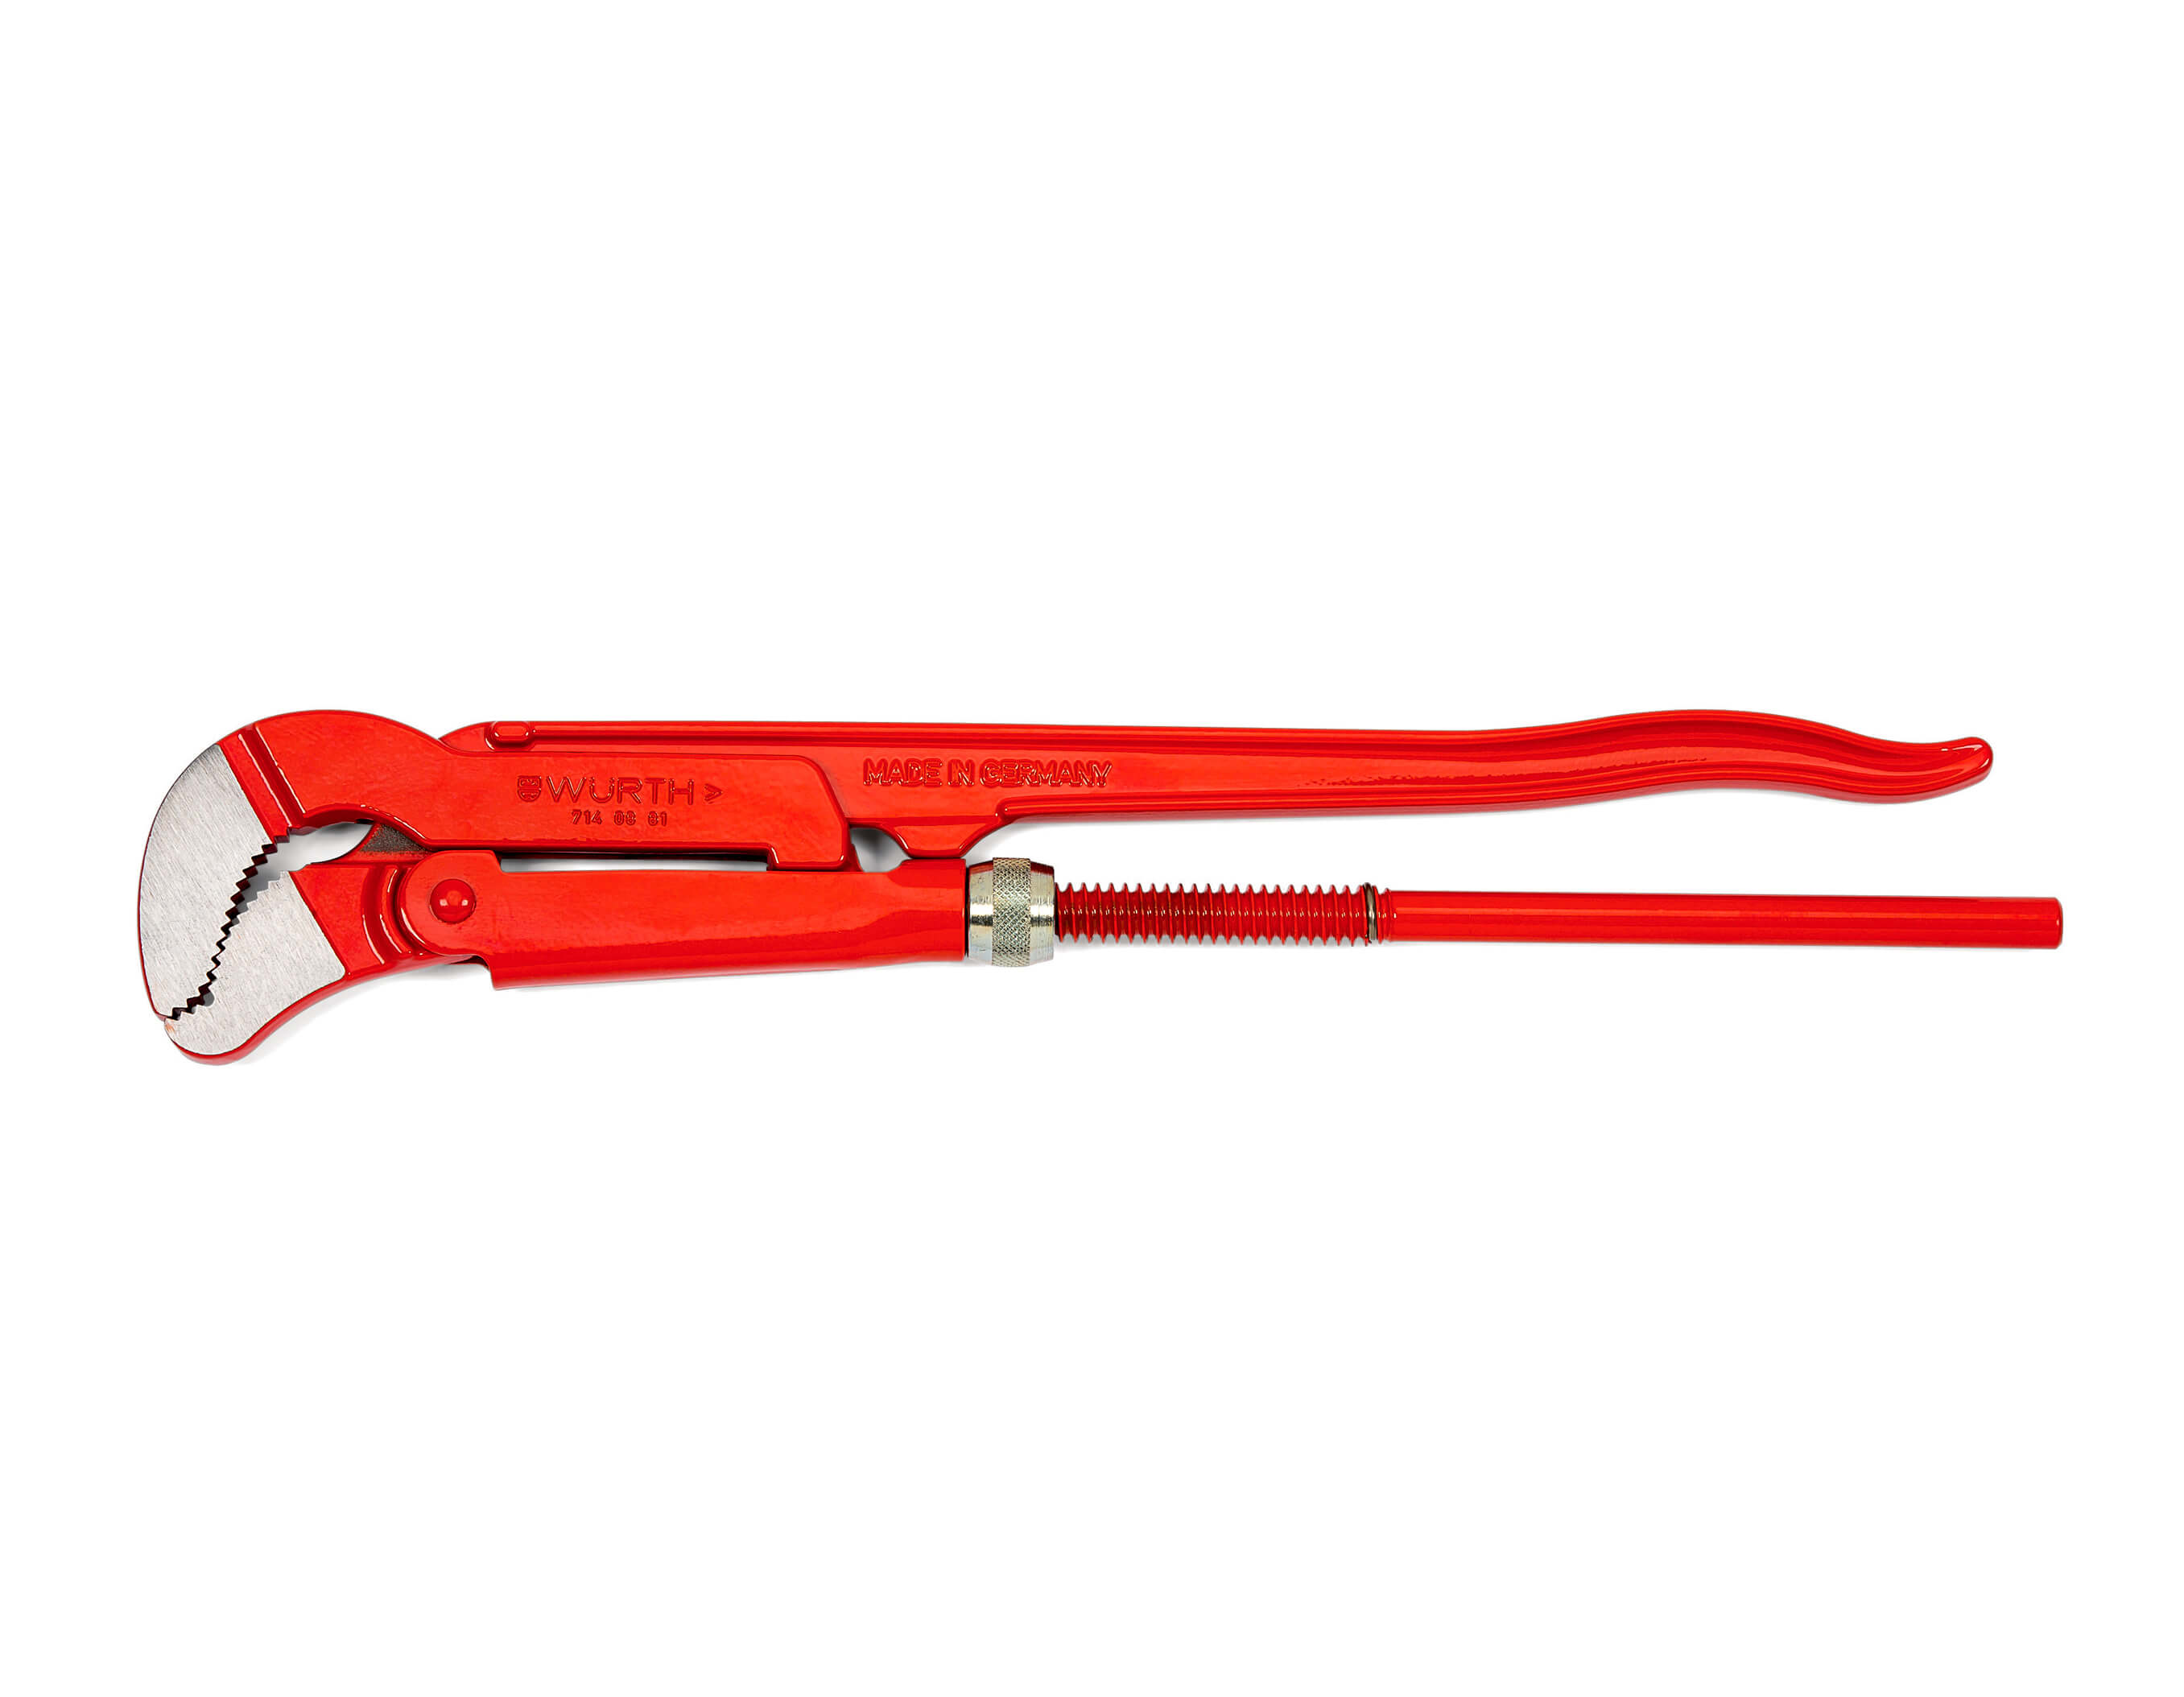 S-jaw corner pipe wrench KNEE-S-1IN